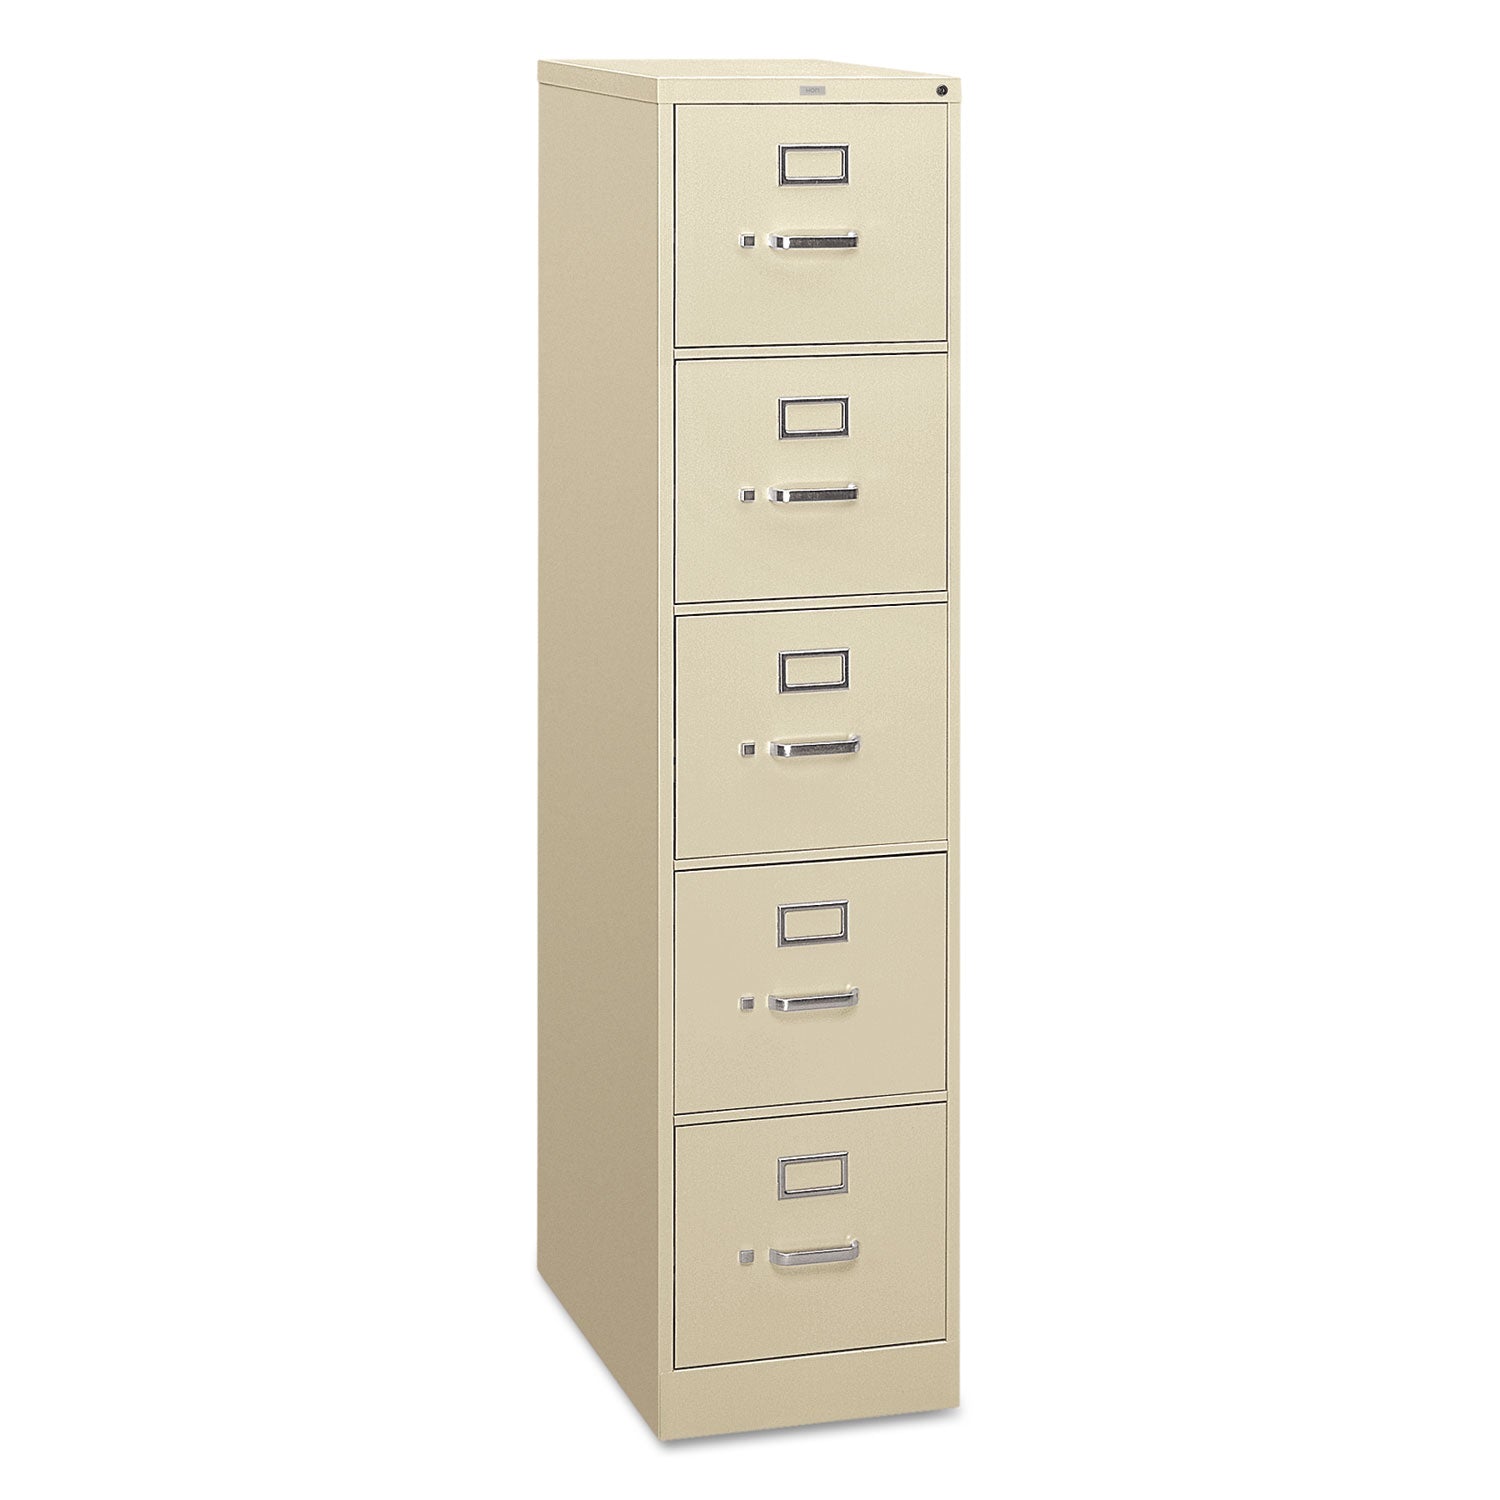 310 Series Vertical File, 5 Letter-Size File Drawers, Putty, 15" x 26.5" x 60 - 